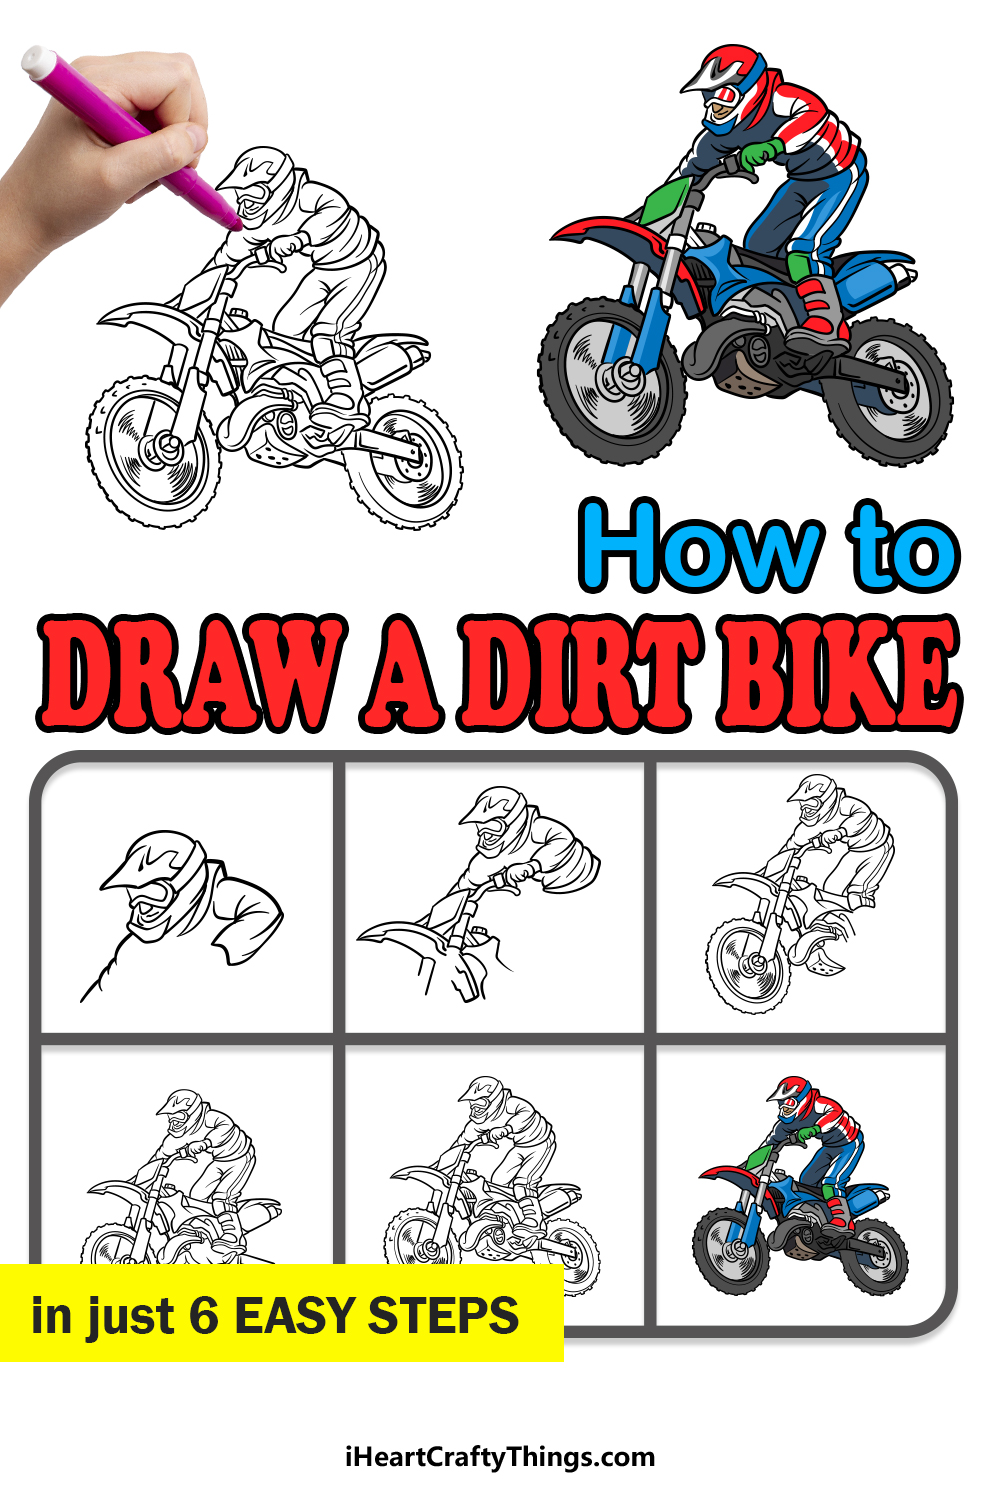 Bike Drawing:Easy, Simple, Cartoon and Step by Step